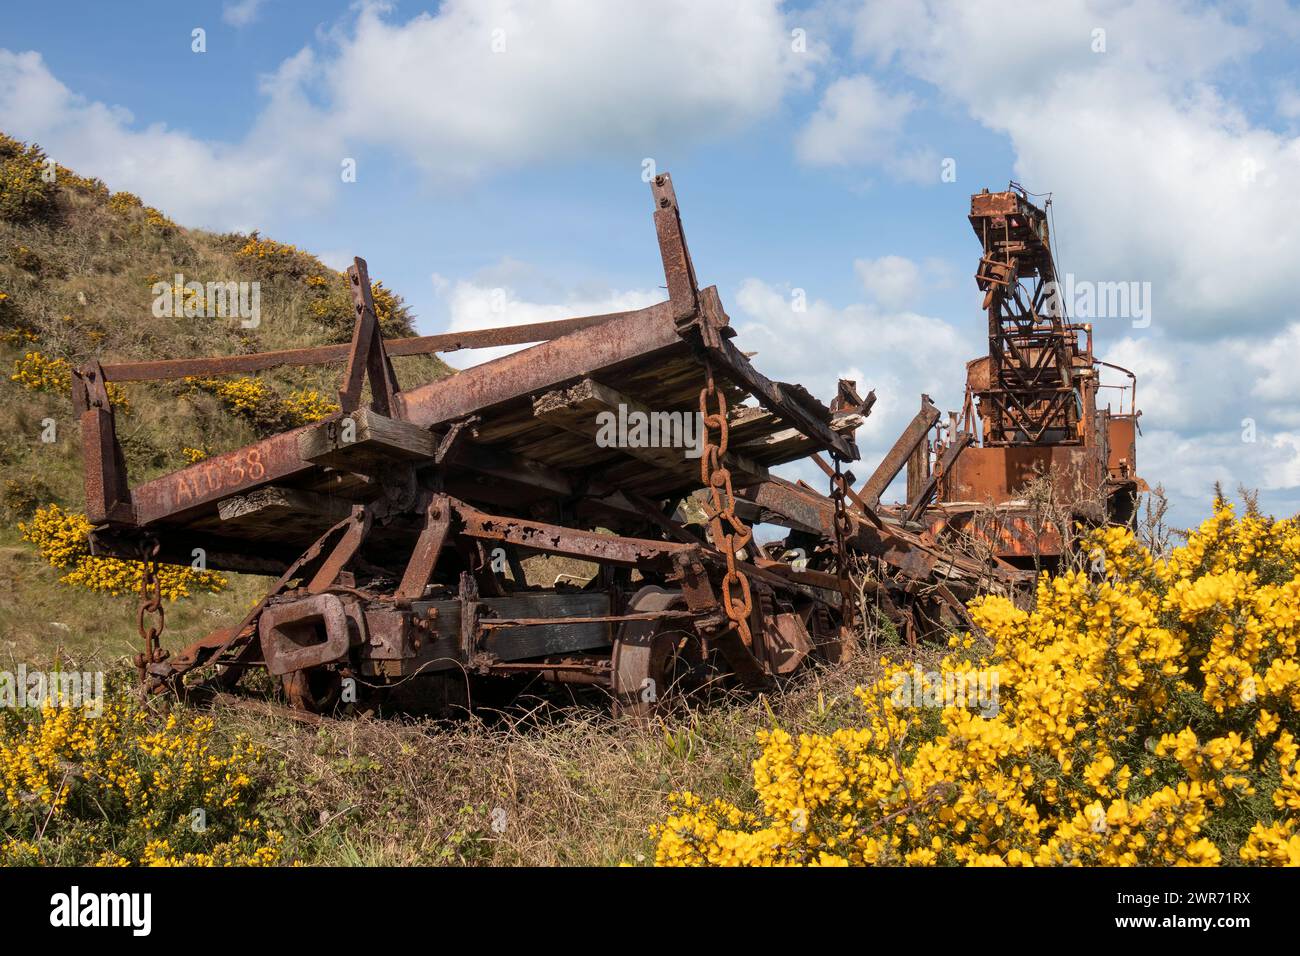 Rusty old derelict train railway crane with heavy chains wheels lifting crane on Alderney Channel Islands with yellow gorse and blue sky Stock Photo